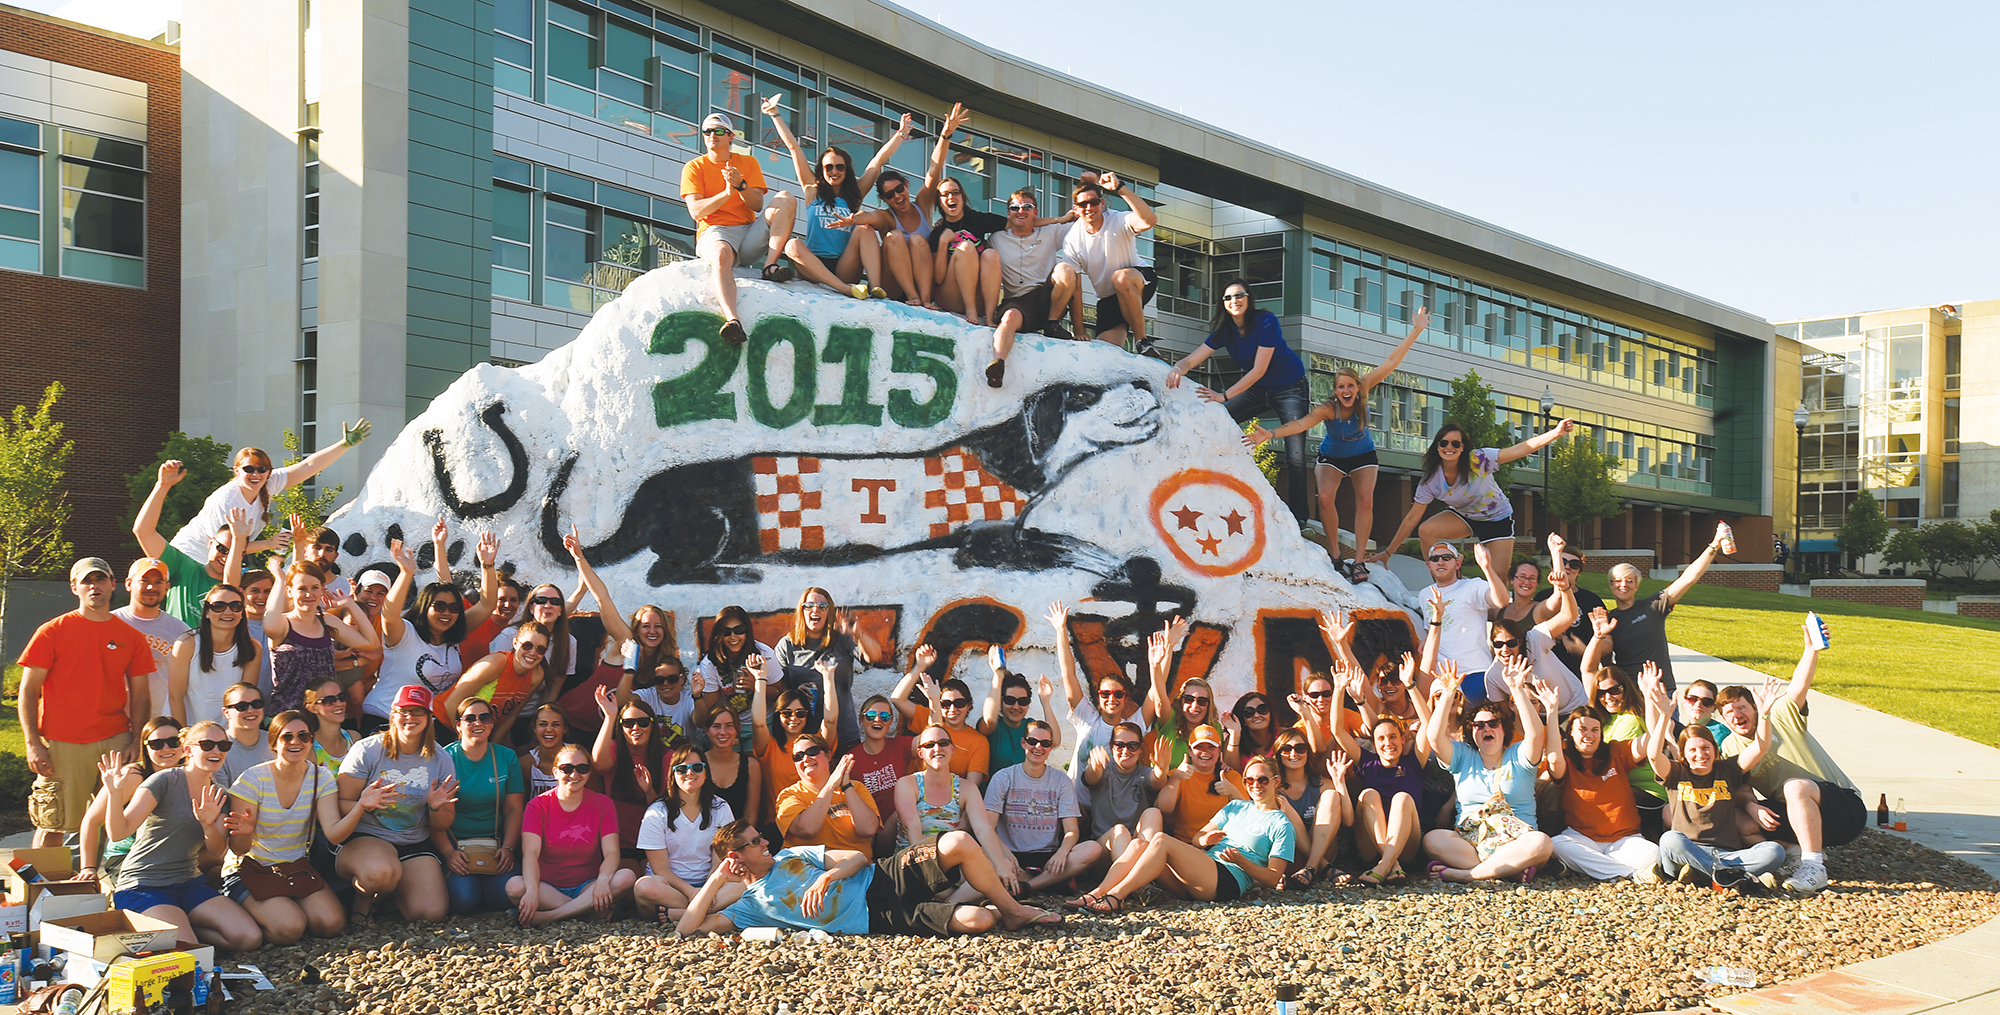 CVM class of 2015 in front of The Rock, painted with Smokey, a horsehow and the state Tri-Star symbol